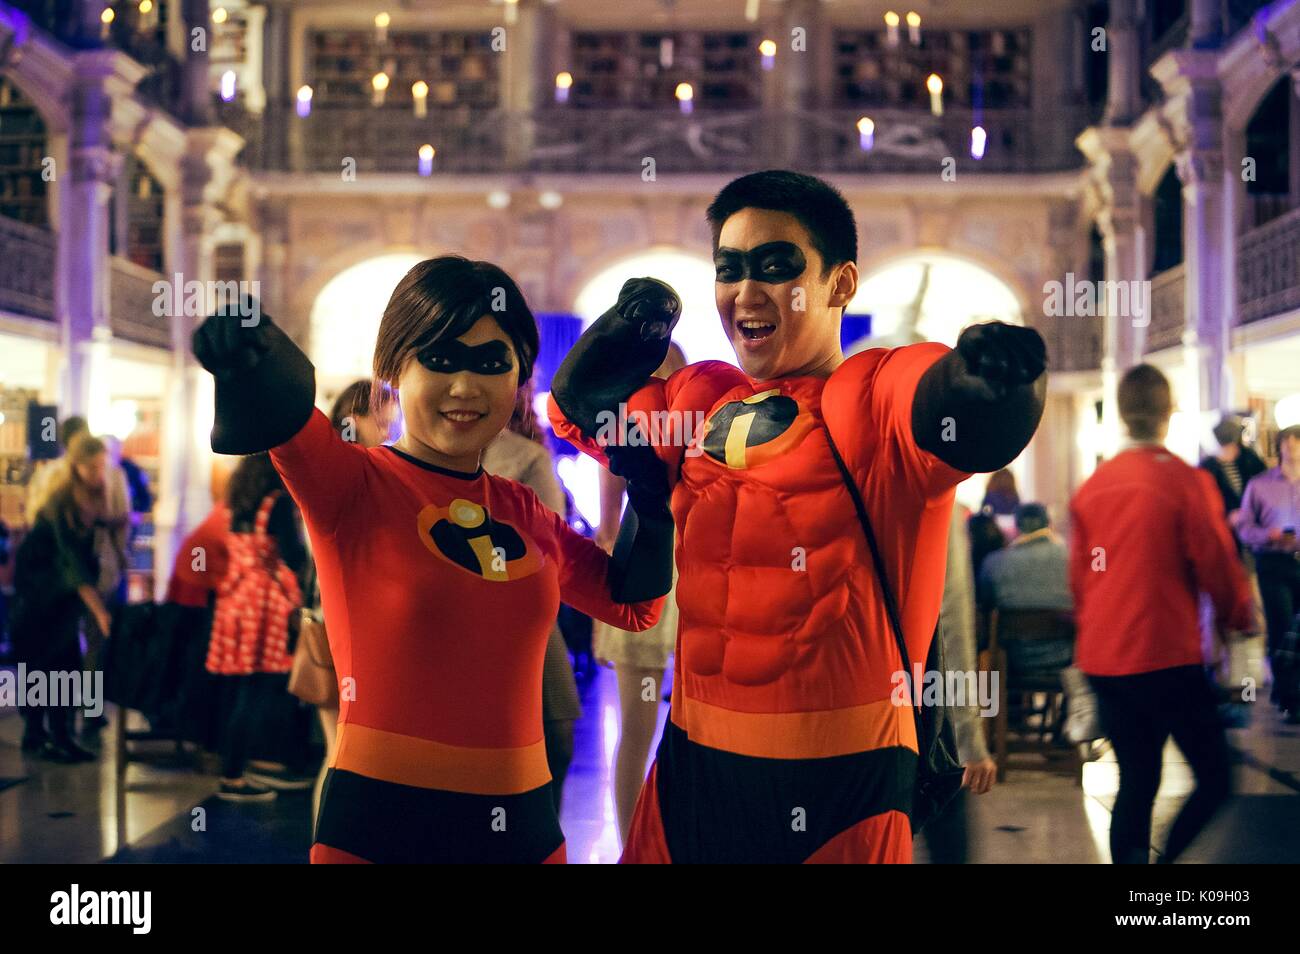 Two college students, a male and female in a couple, point and pose in matching costumes featuring characters from the film 'The Incredibles', on Halloween at Johns Hopkins University's George Peabody Library, 2015. Courtesy Eric Chen. Stock Photo